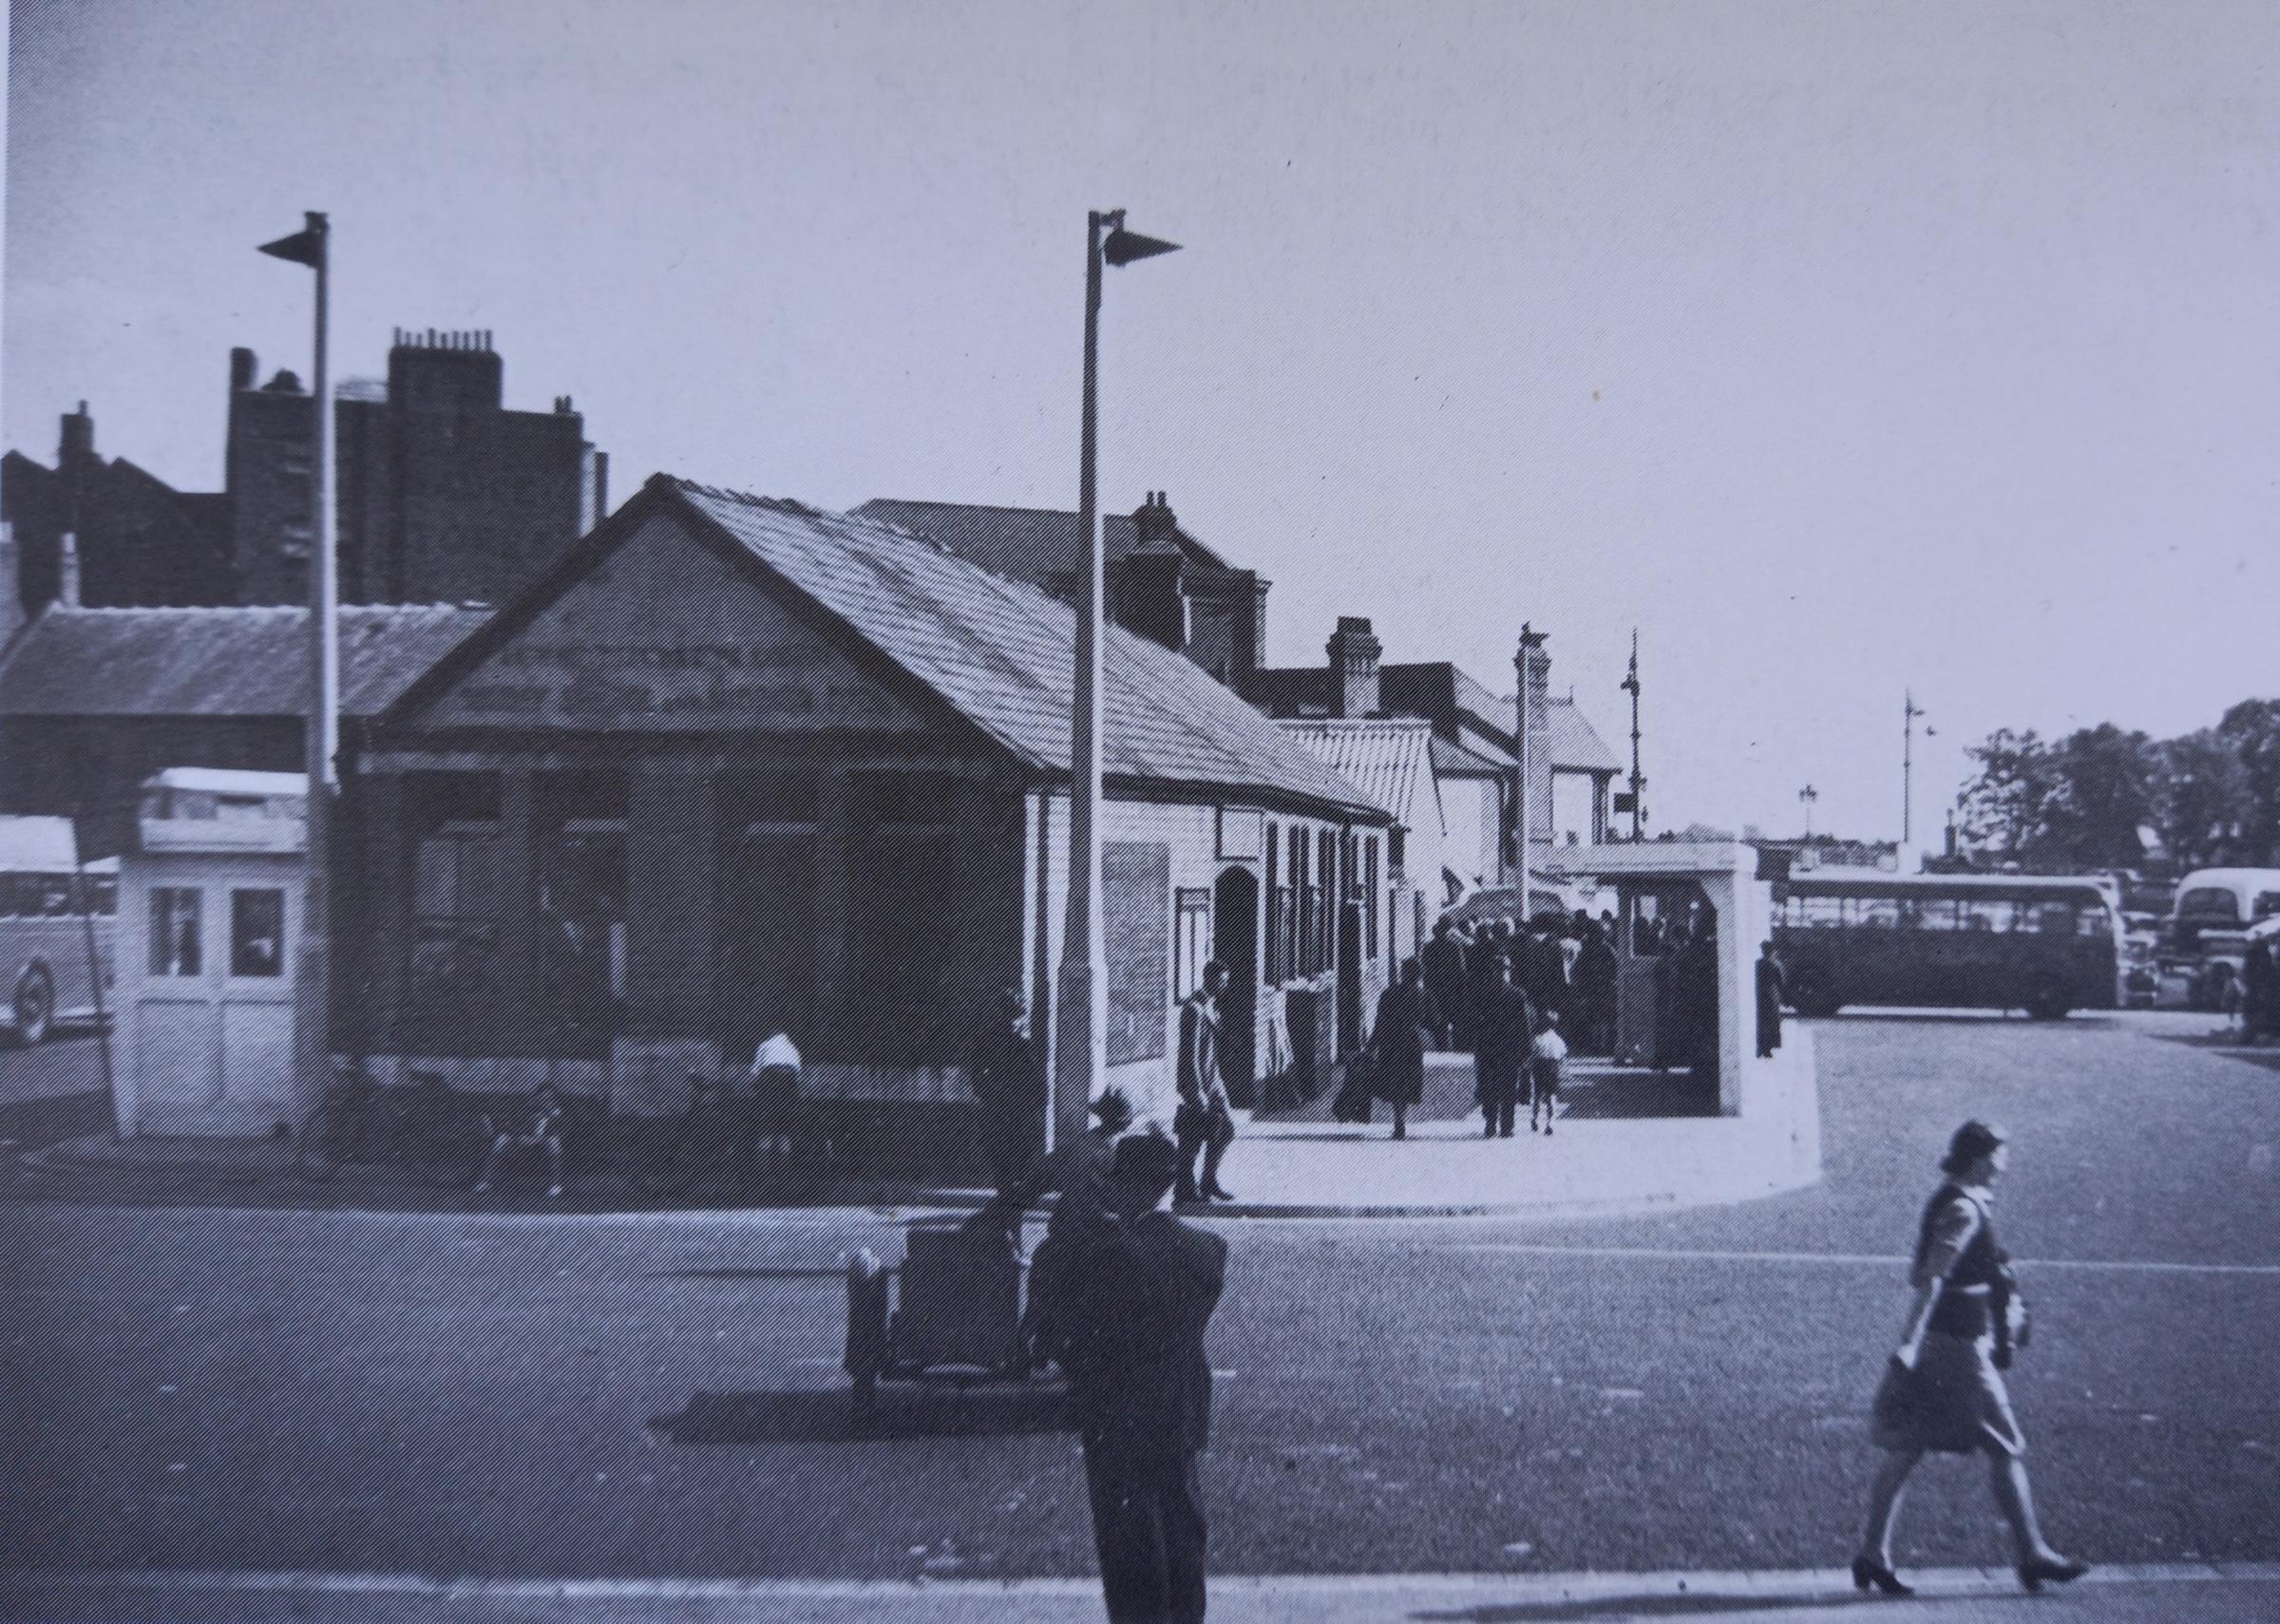 A Newport Street station scene familiar to all bus travellers in the 1950s